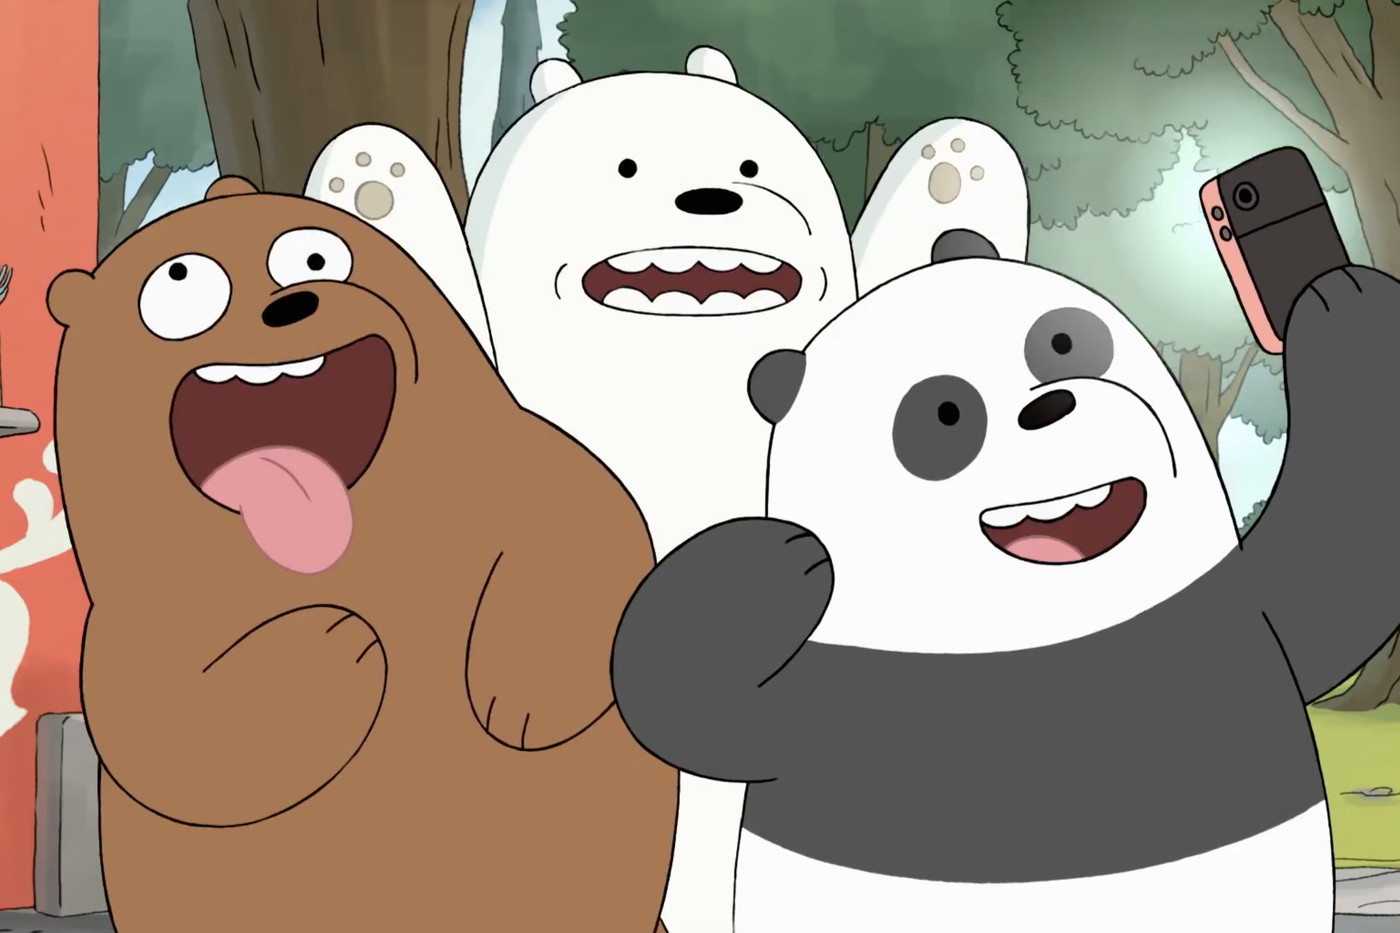 We Bare Bears movie trailer: the bears are back, baby - Polygon